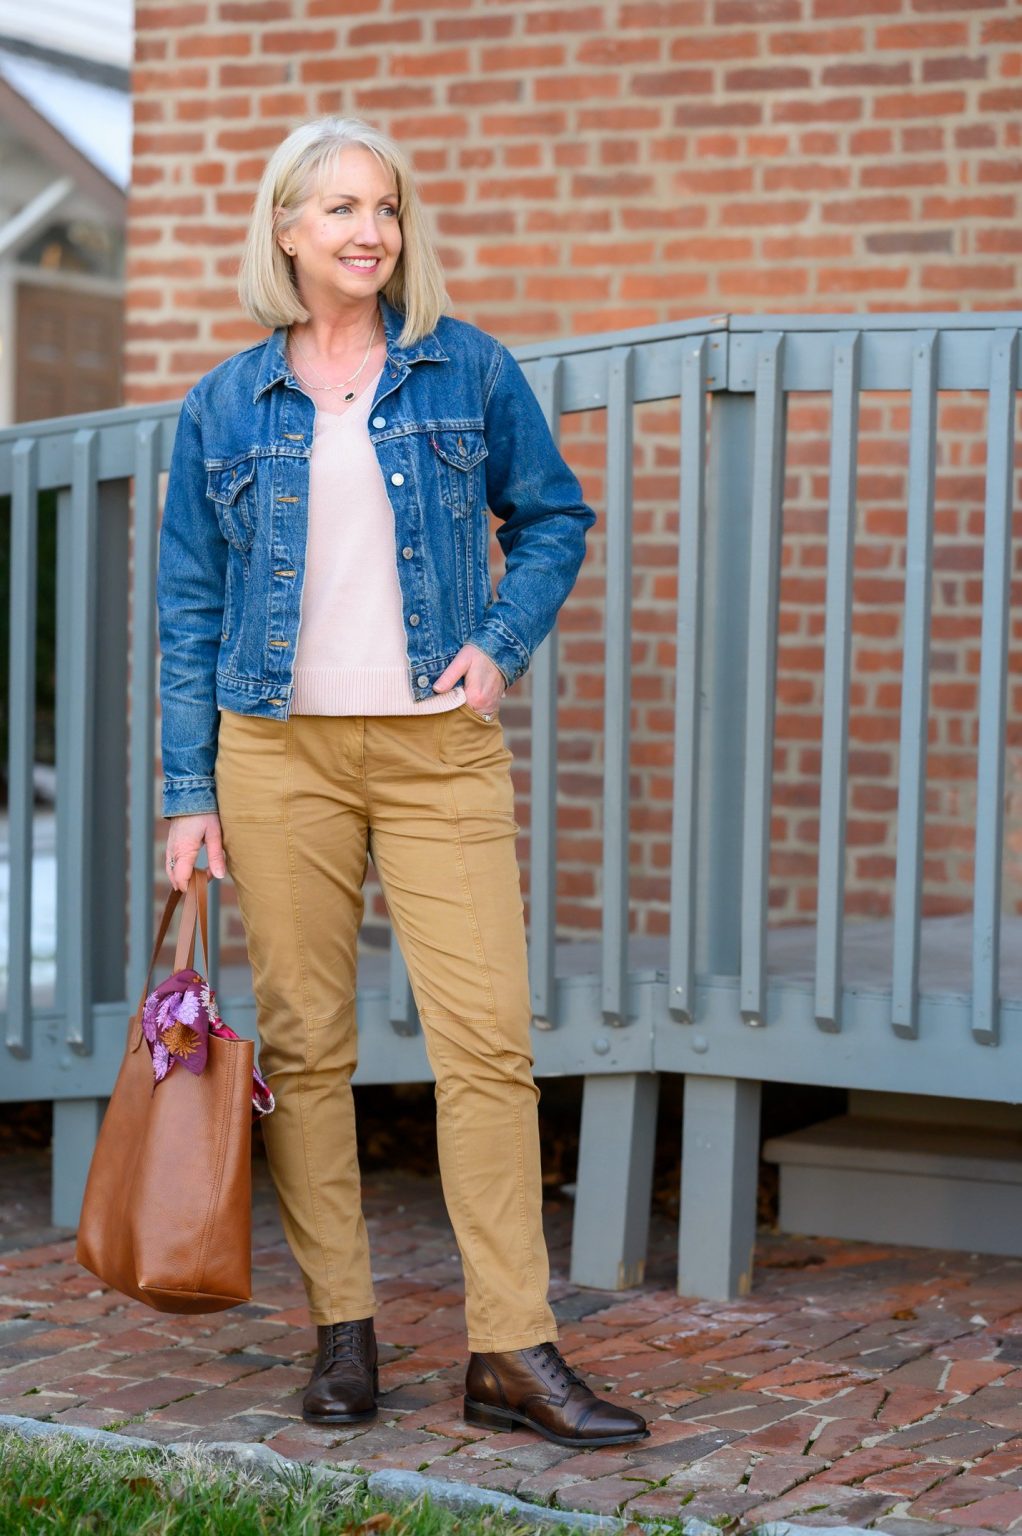 Favorite Spring Purchases Combine in Chic, Casual Look - Dressed for My Day